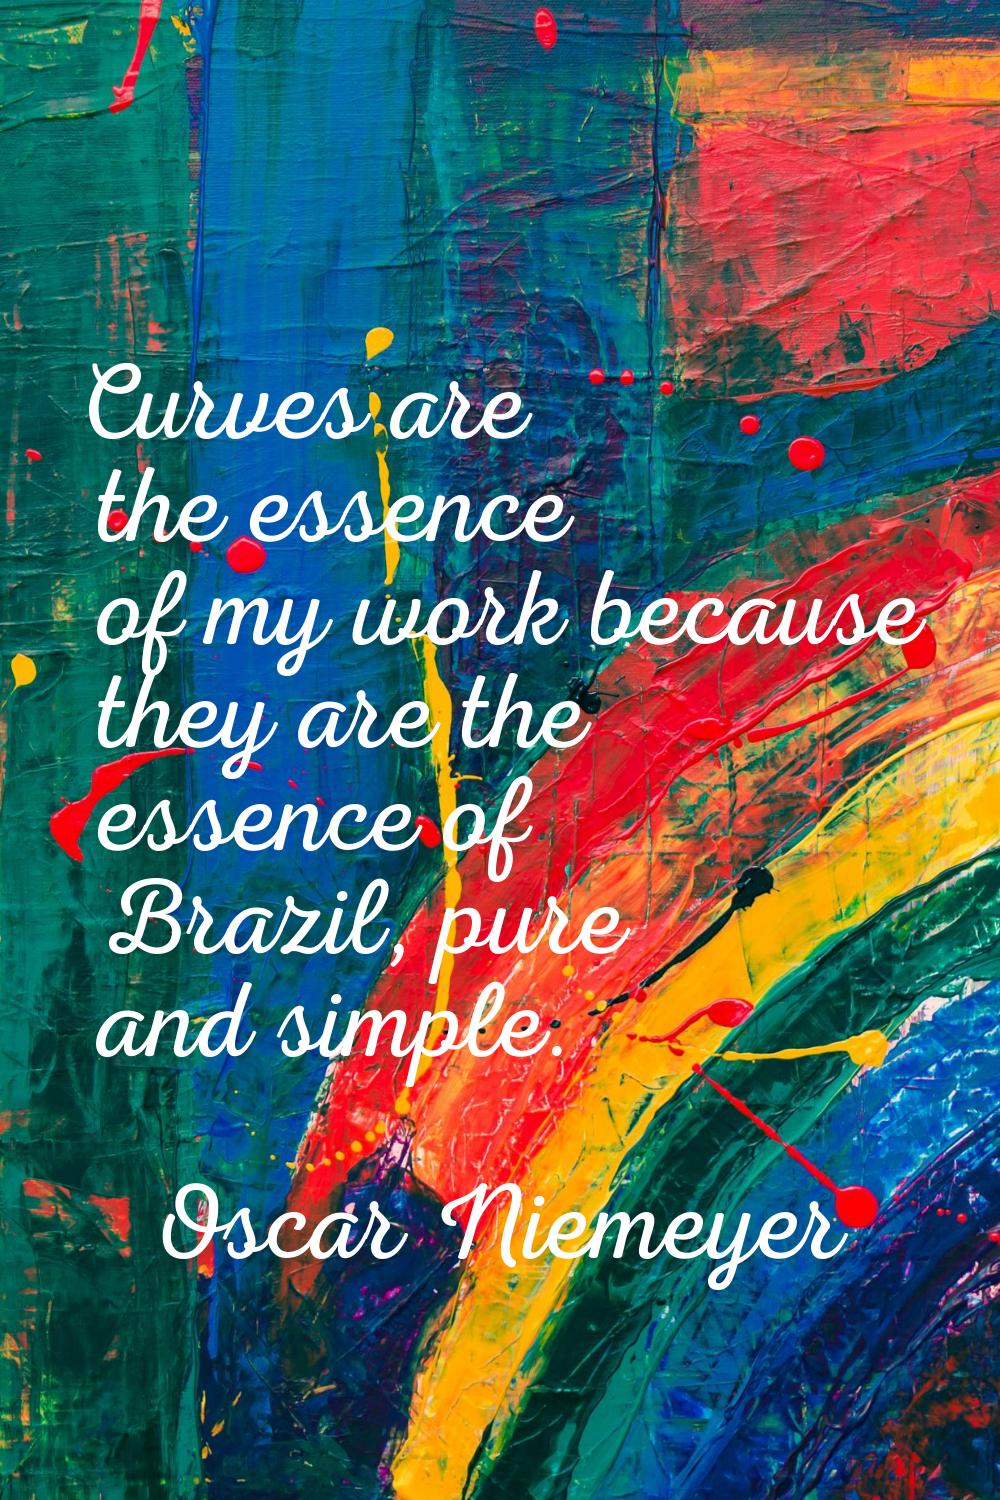 Curves are the essence of my work because they are the essence of Brazil, pure and simple.